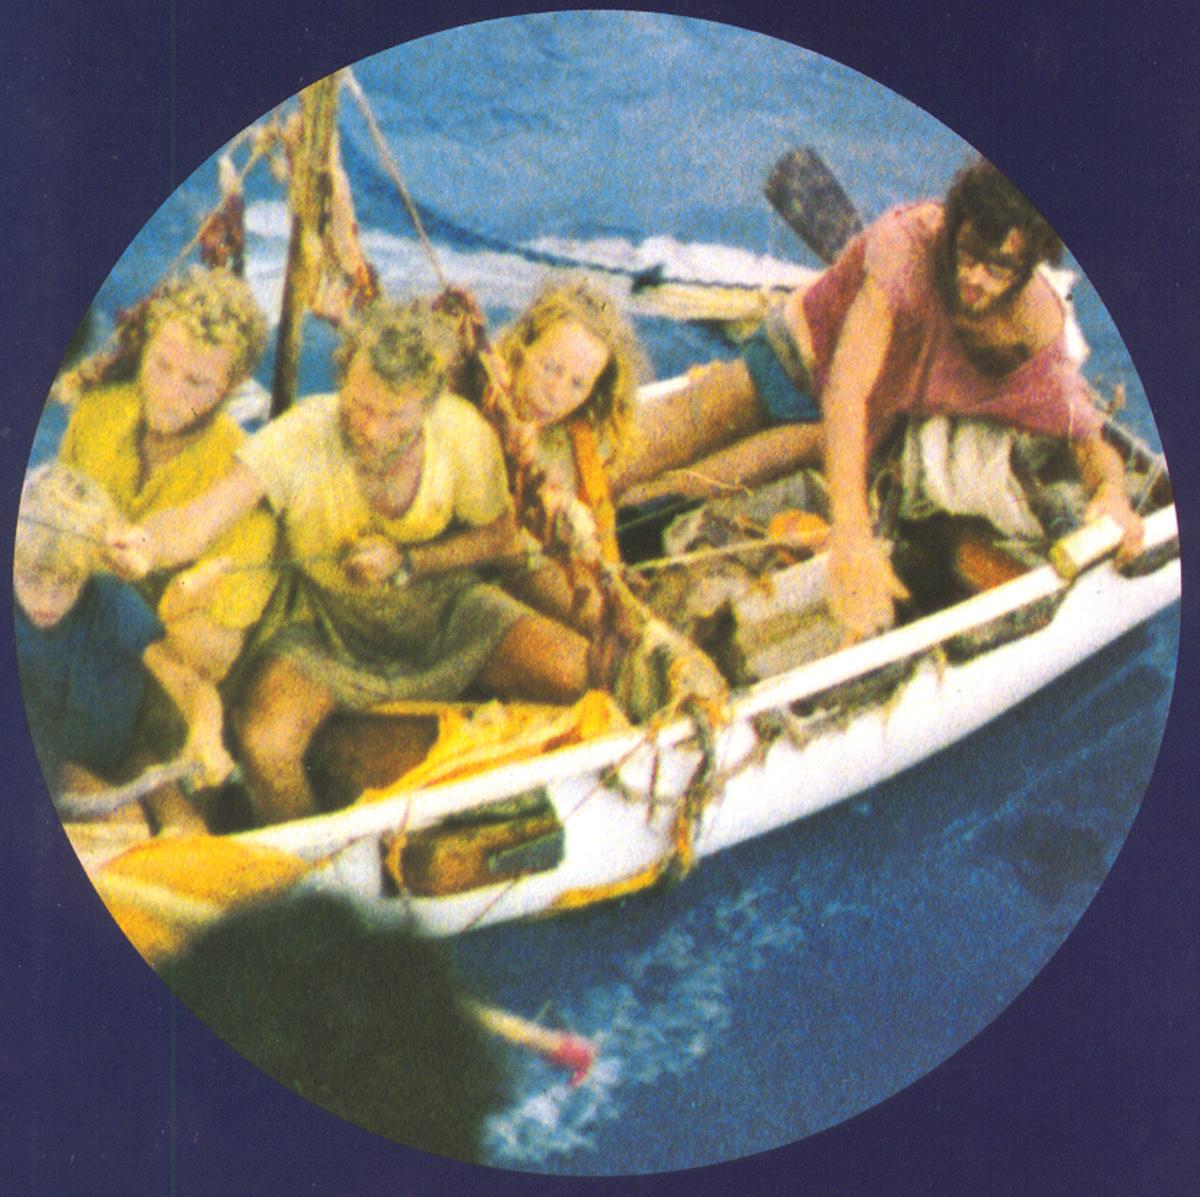 The crew being rescued. (Courtesy of The Robertson Family Archive)